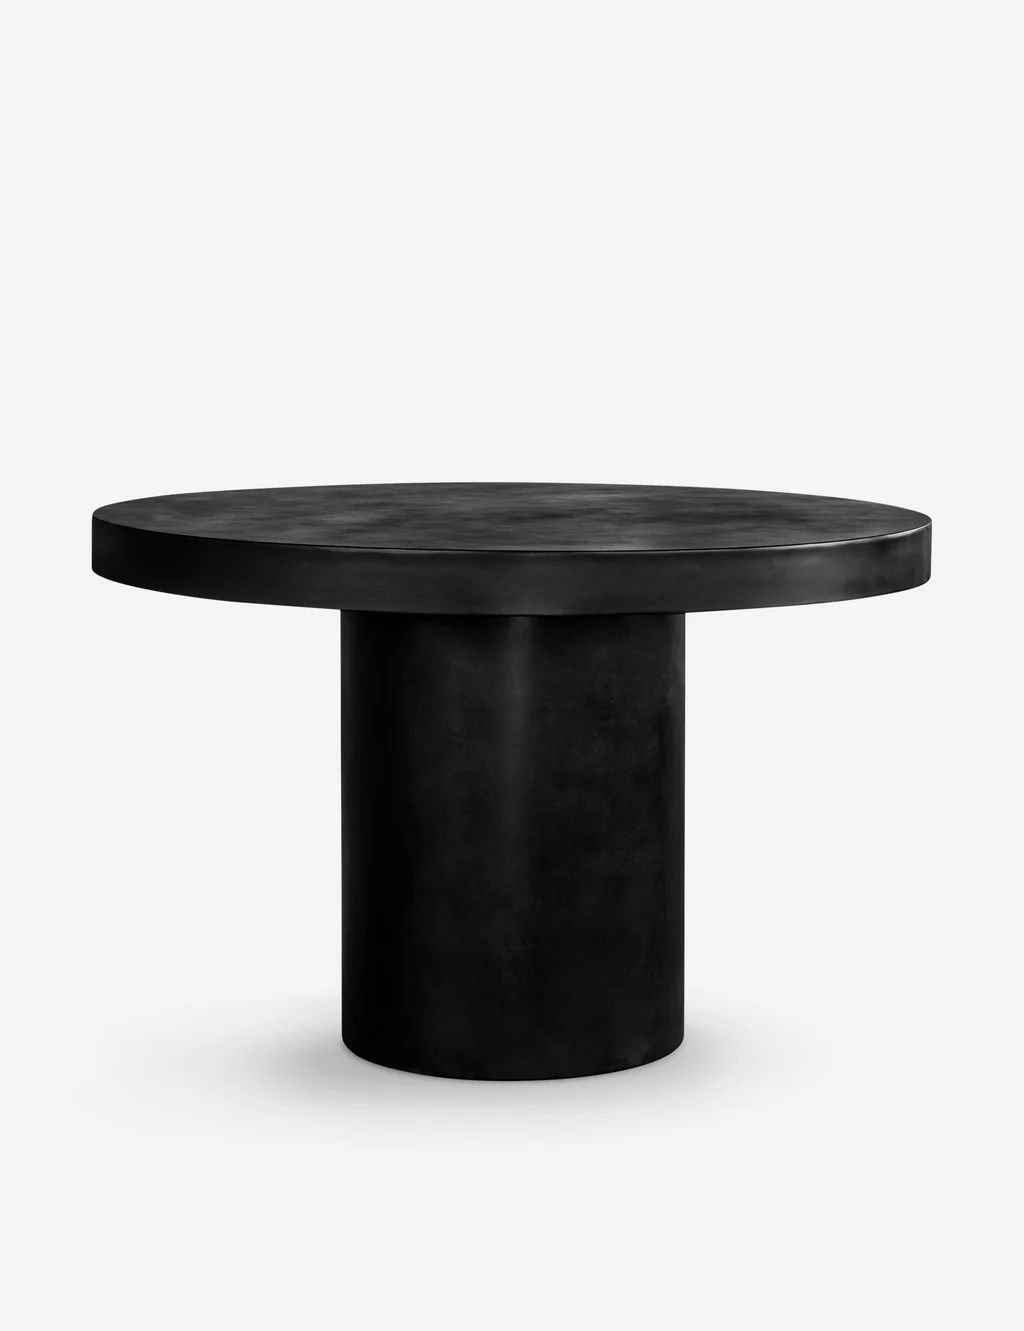 Niel Indoor / Outdoor Round Dining Table | Lulu and Georgia 